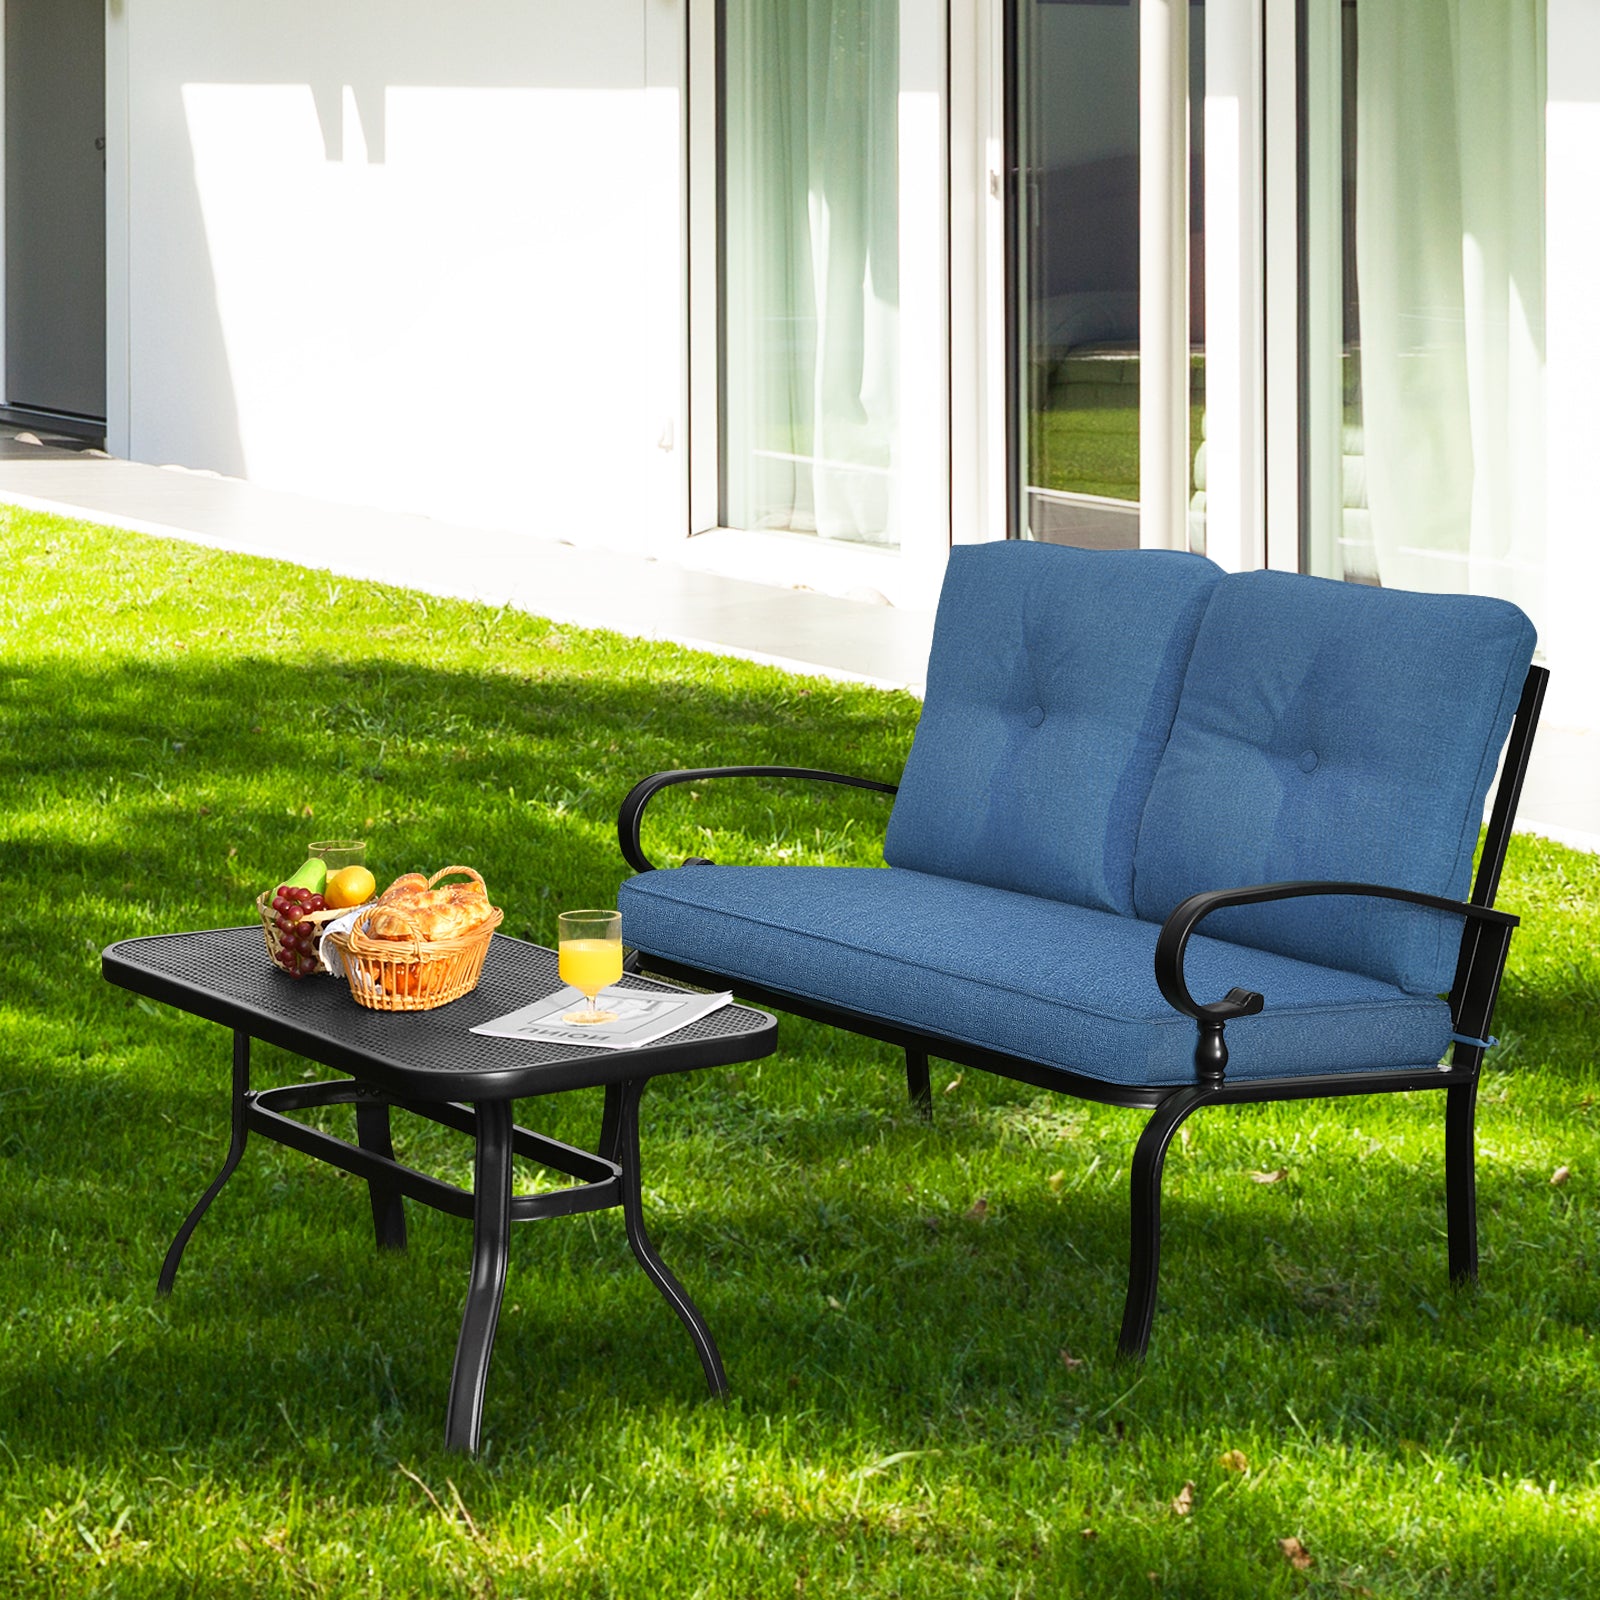 Garden Furniture Set with 2 Seat Cushioned Sofa and Coffee Table-Navy